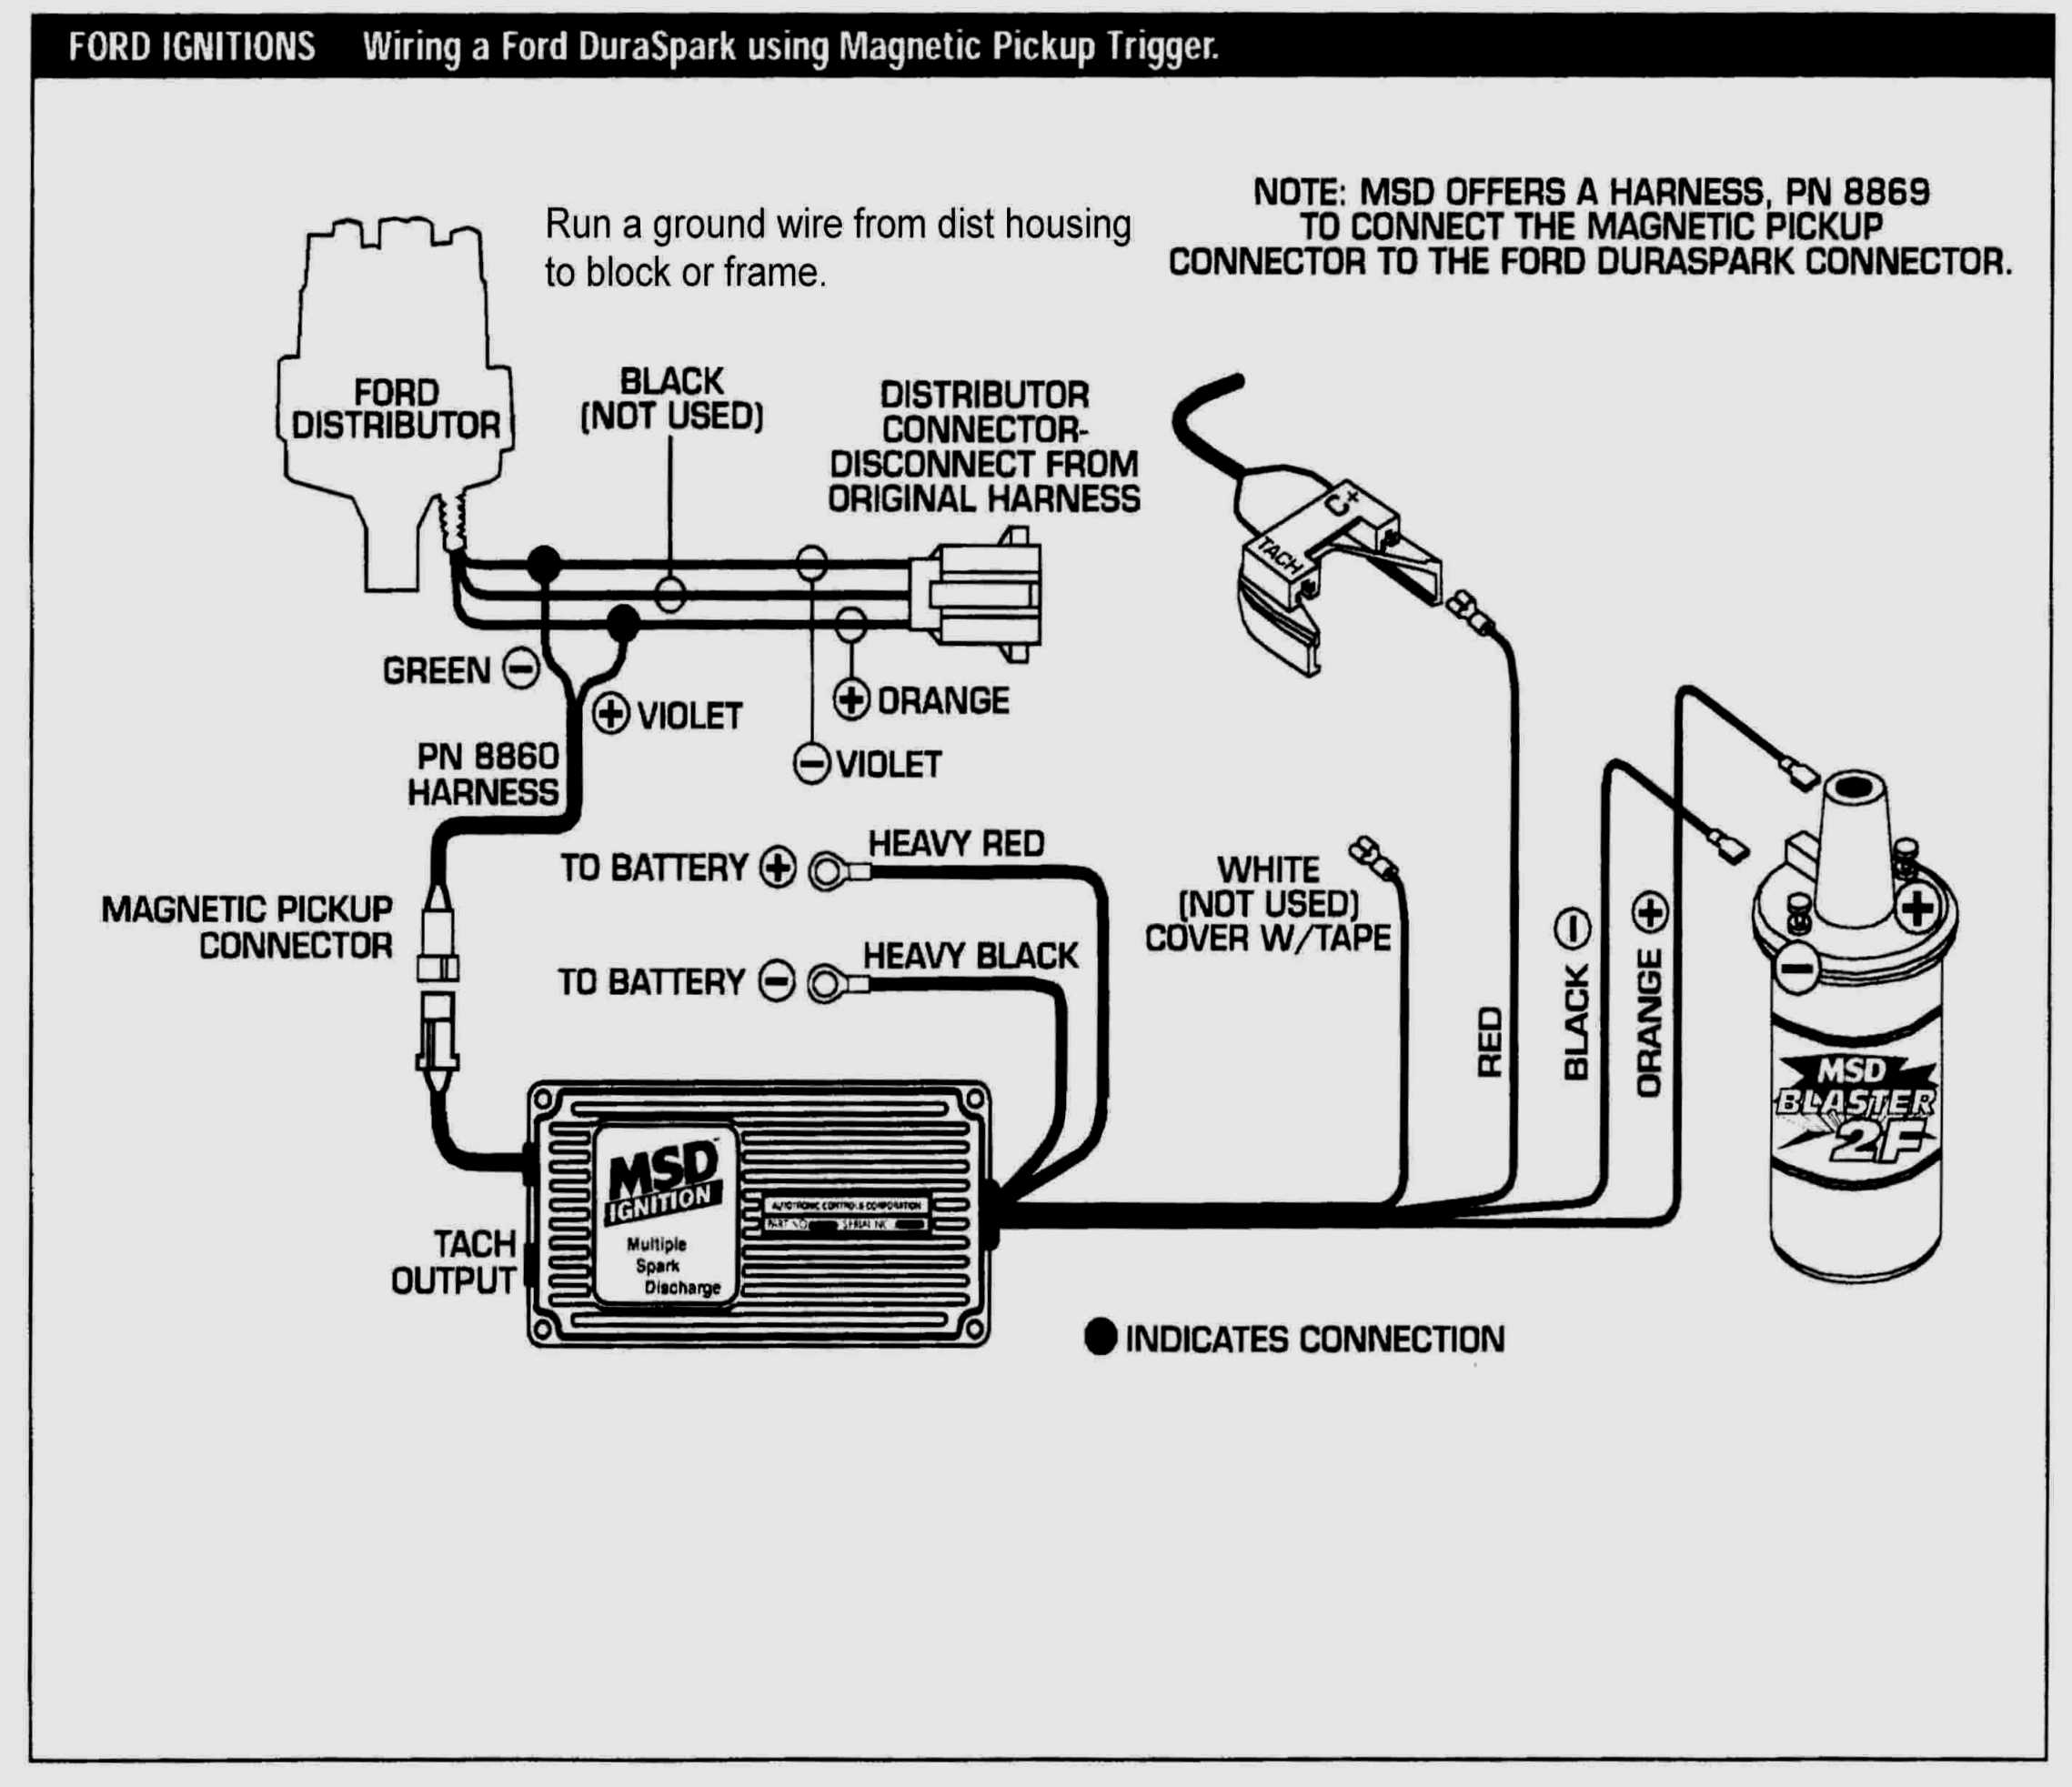 Ford Ignition Control Module Wiring Diagram | Cadician's Blog